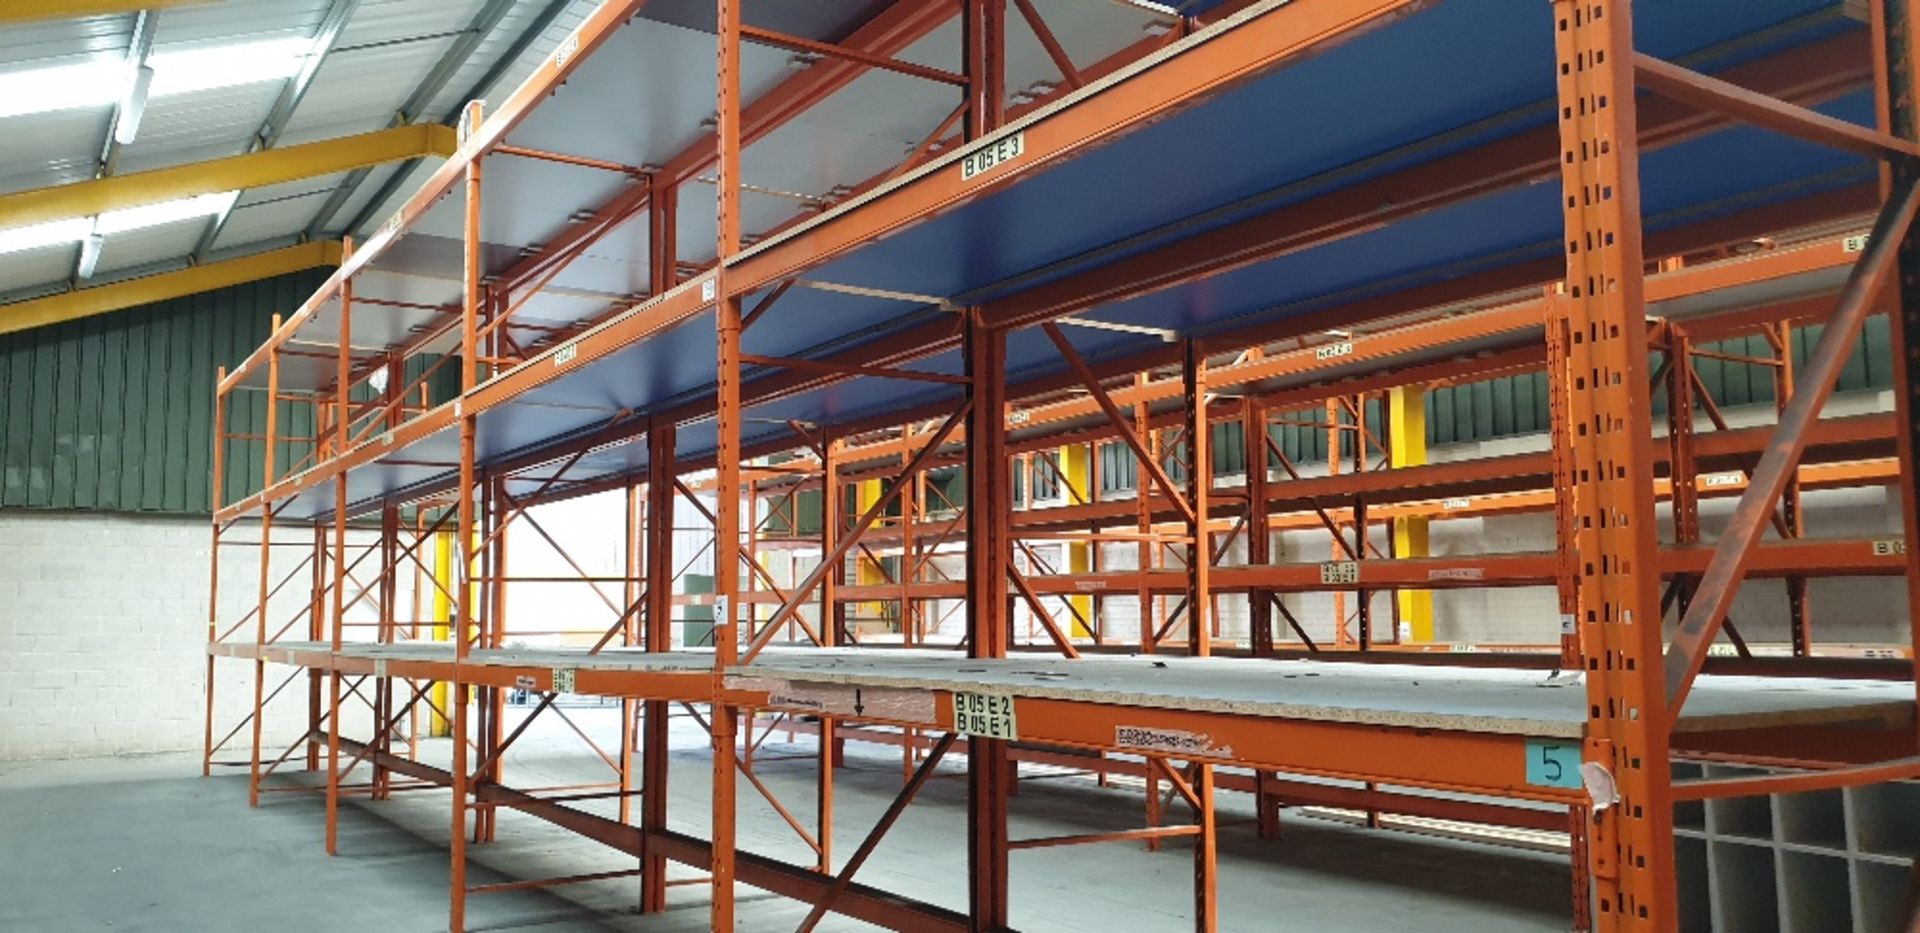 5 - bays of heavy duty pallet racking with 25mm chipboard shelving